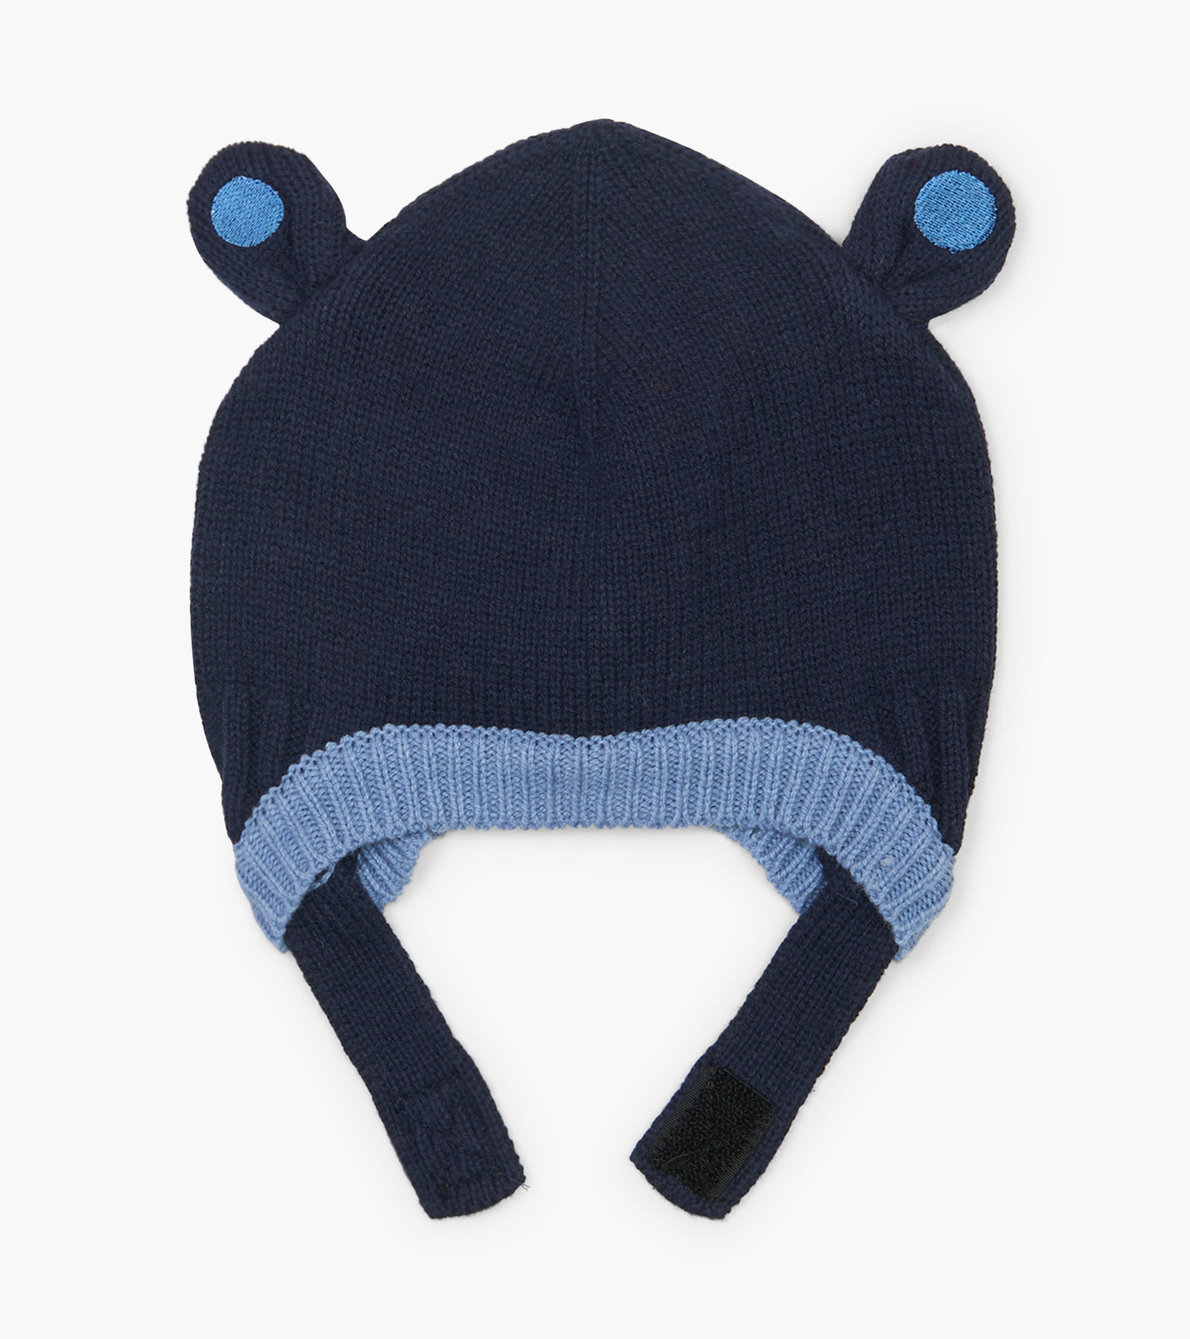 View larger image of Blue Bear Ears Baby Winter Hat